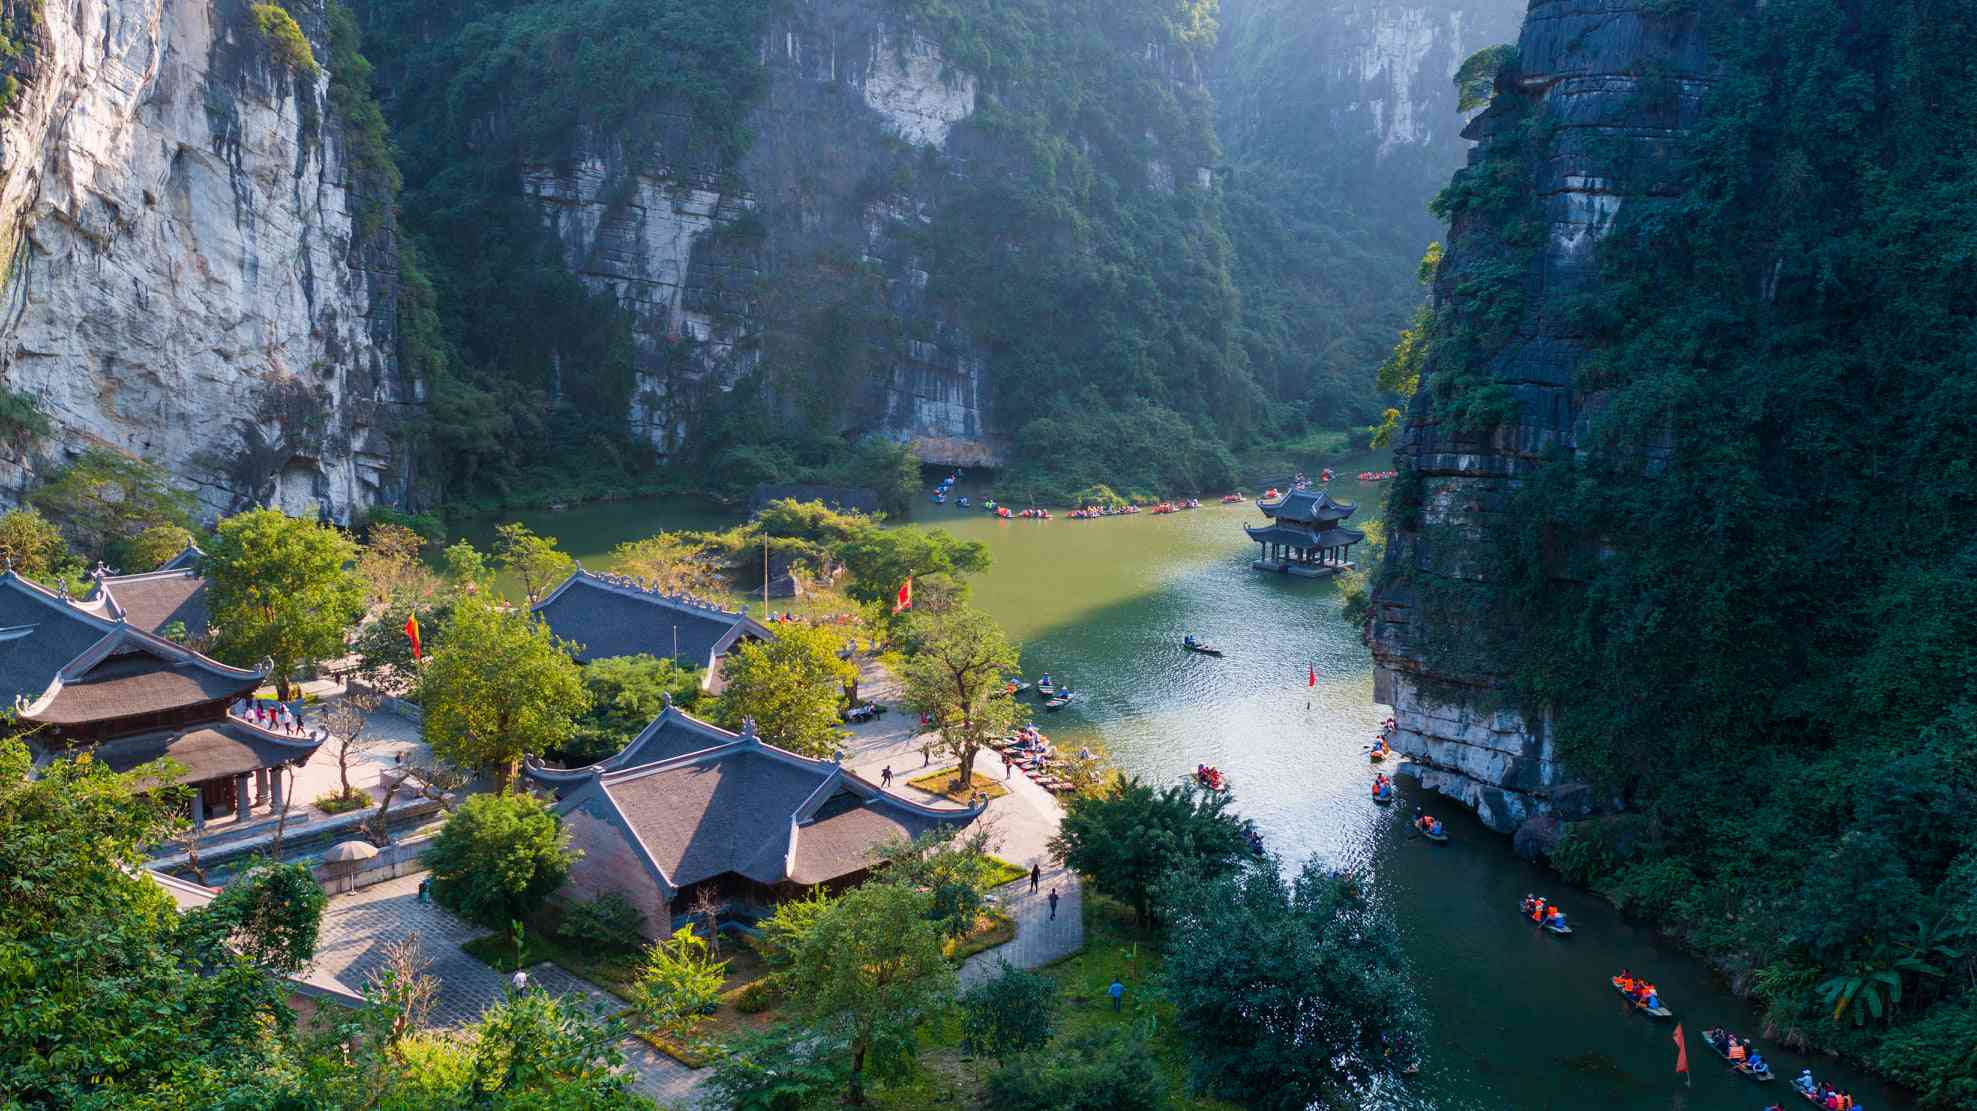 Experience the breathtaking beauty of both Halong Bay and Ninh Binh on one unforgettable journey